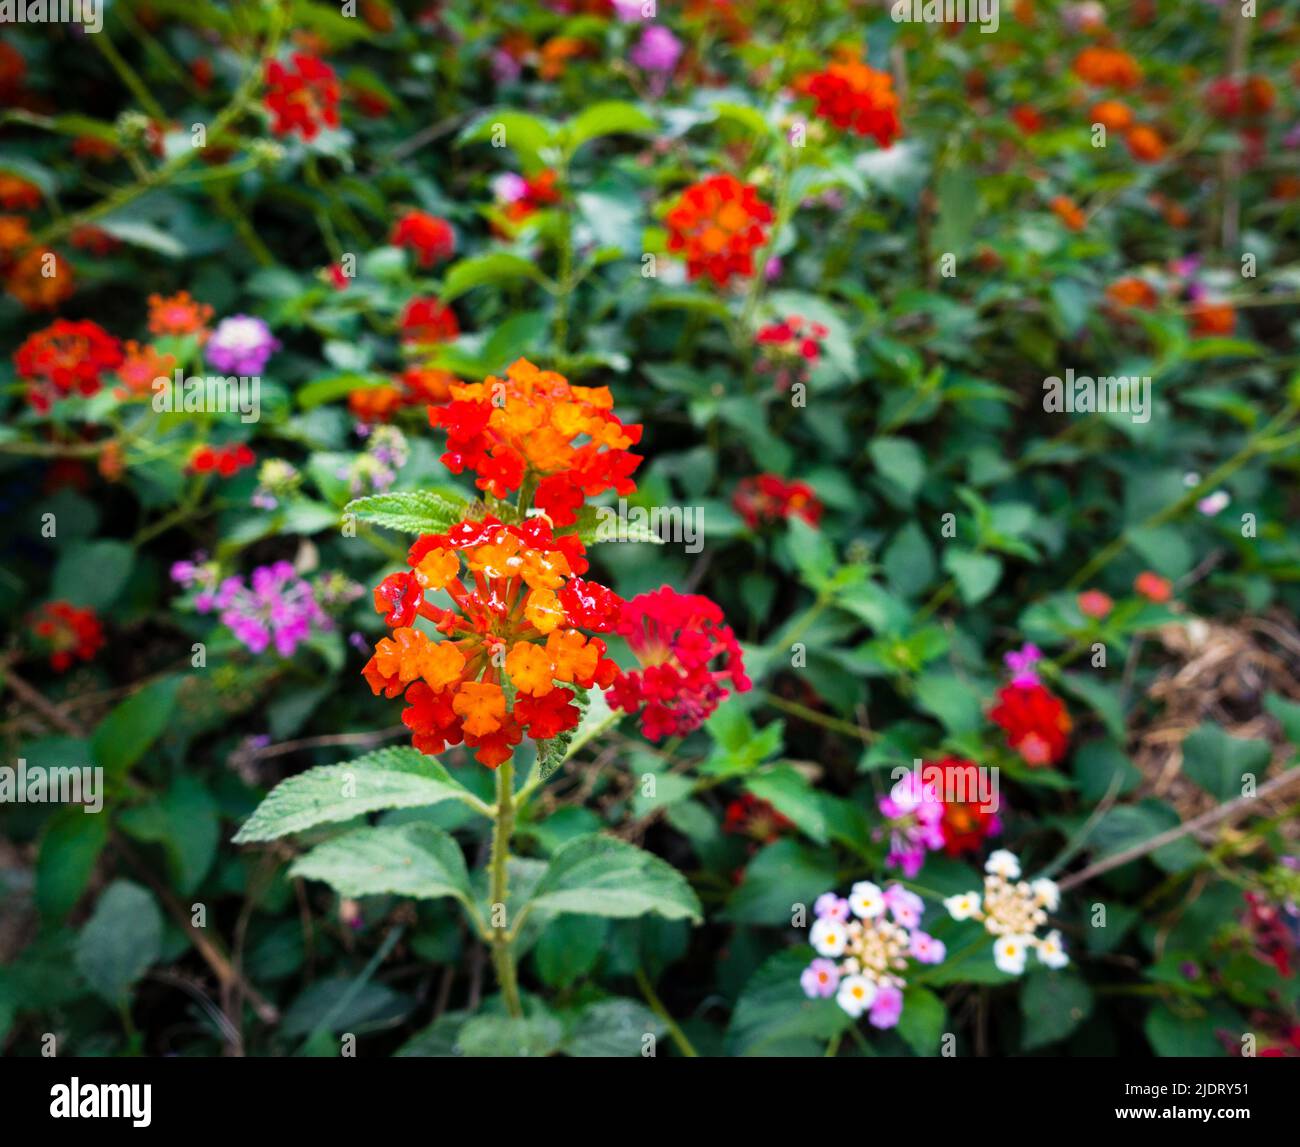 Flower and seeds of Lantana camara ,common lantana is a species of flowering plant within the verbena family Verbenaceae, native to the American tropi Stock Photo